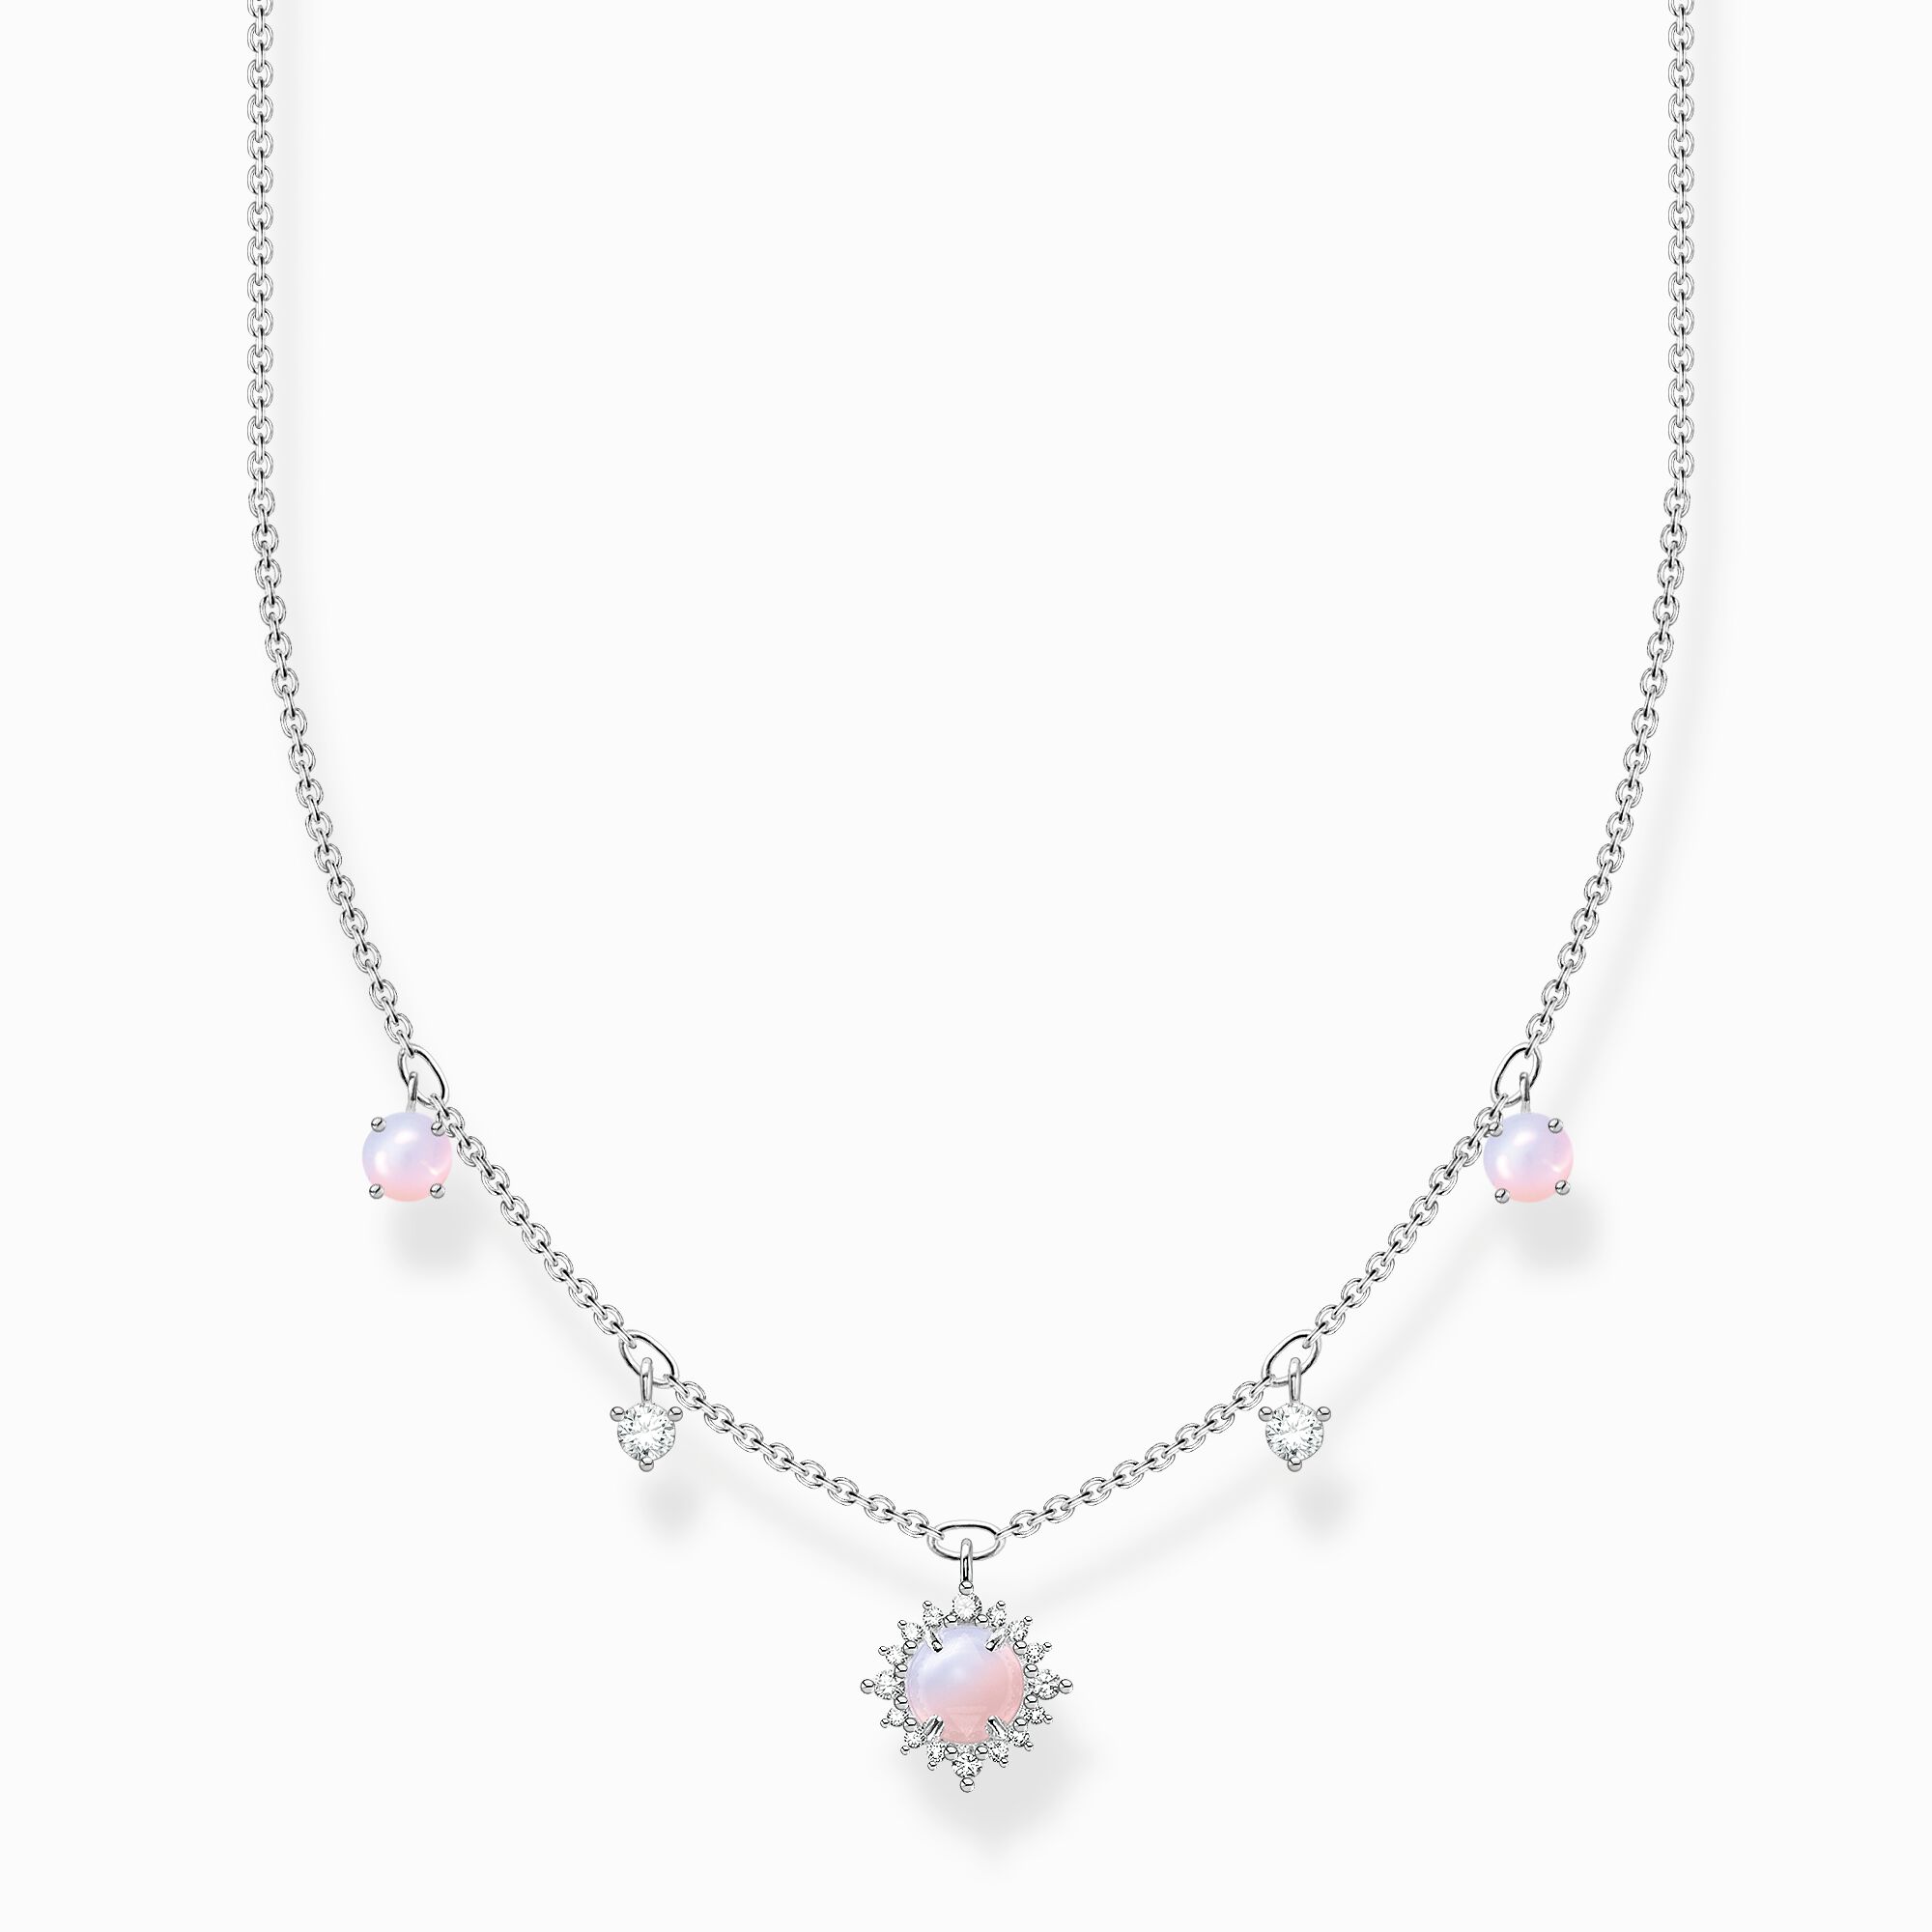 Necklace vintage shimmering pink opal-coloured stone from the Charming Collection collection in the THOMAS SABO online store